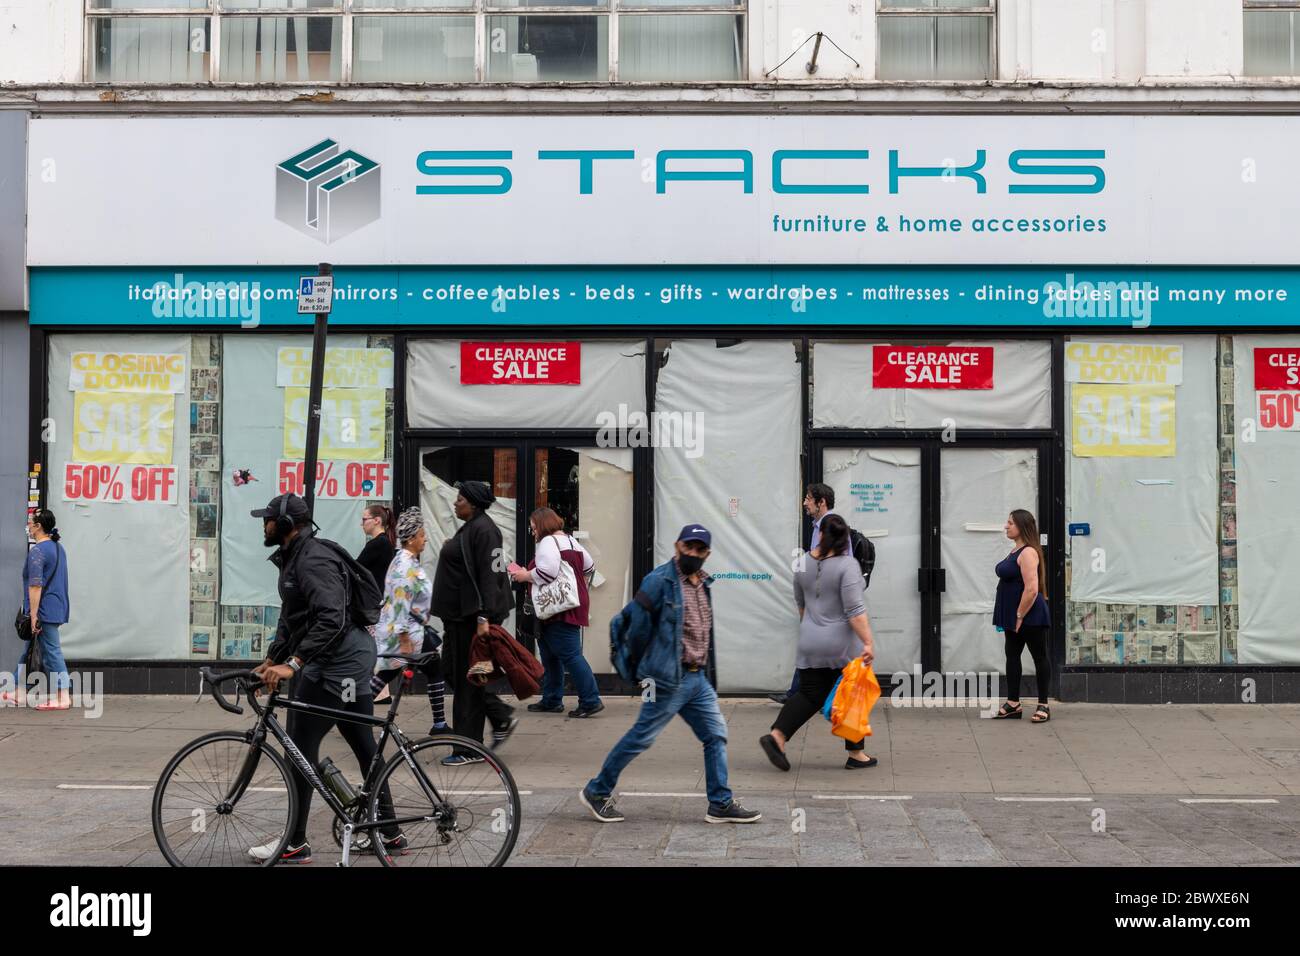 Pedestrians and a cyclist walking pass a closed down high street furniture store. This is a common sight as much of furniture sales have moved online. Stock Photo